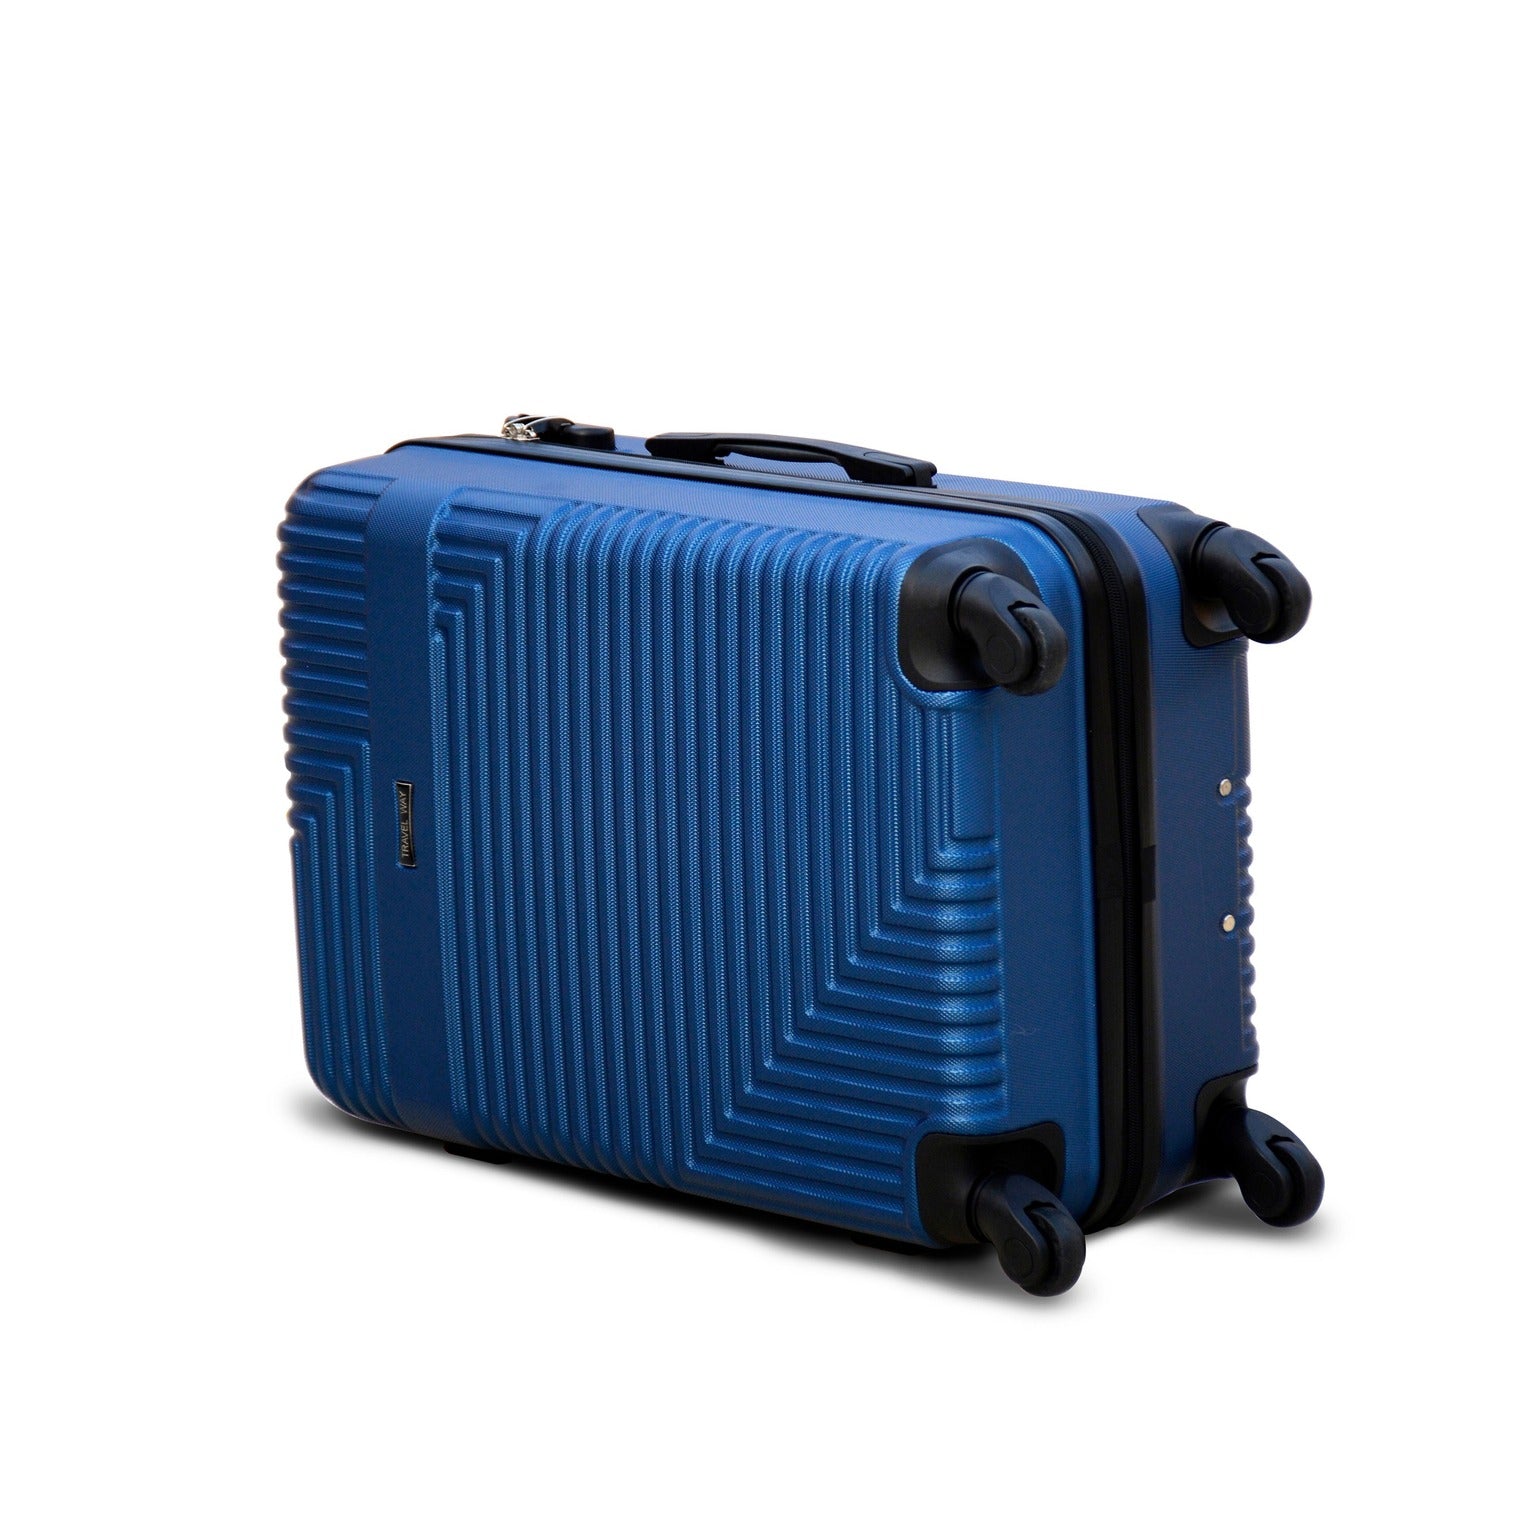 28" Blue Colour Travel Way ABS Luggage Lightweight Hard Case Trolley Bag Zaappy.com